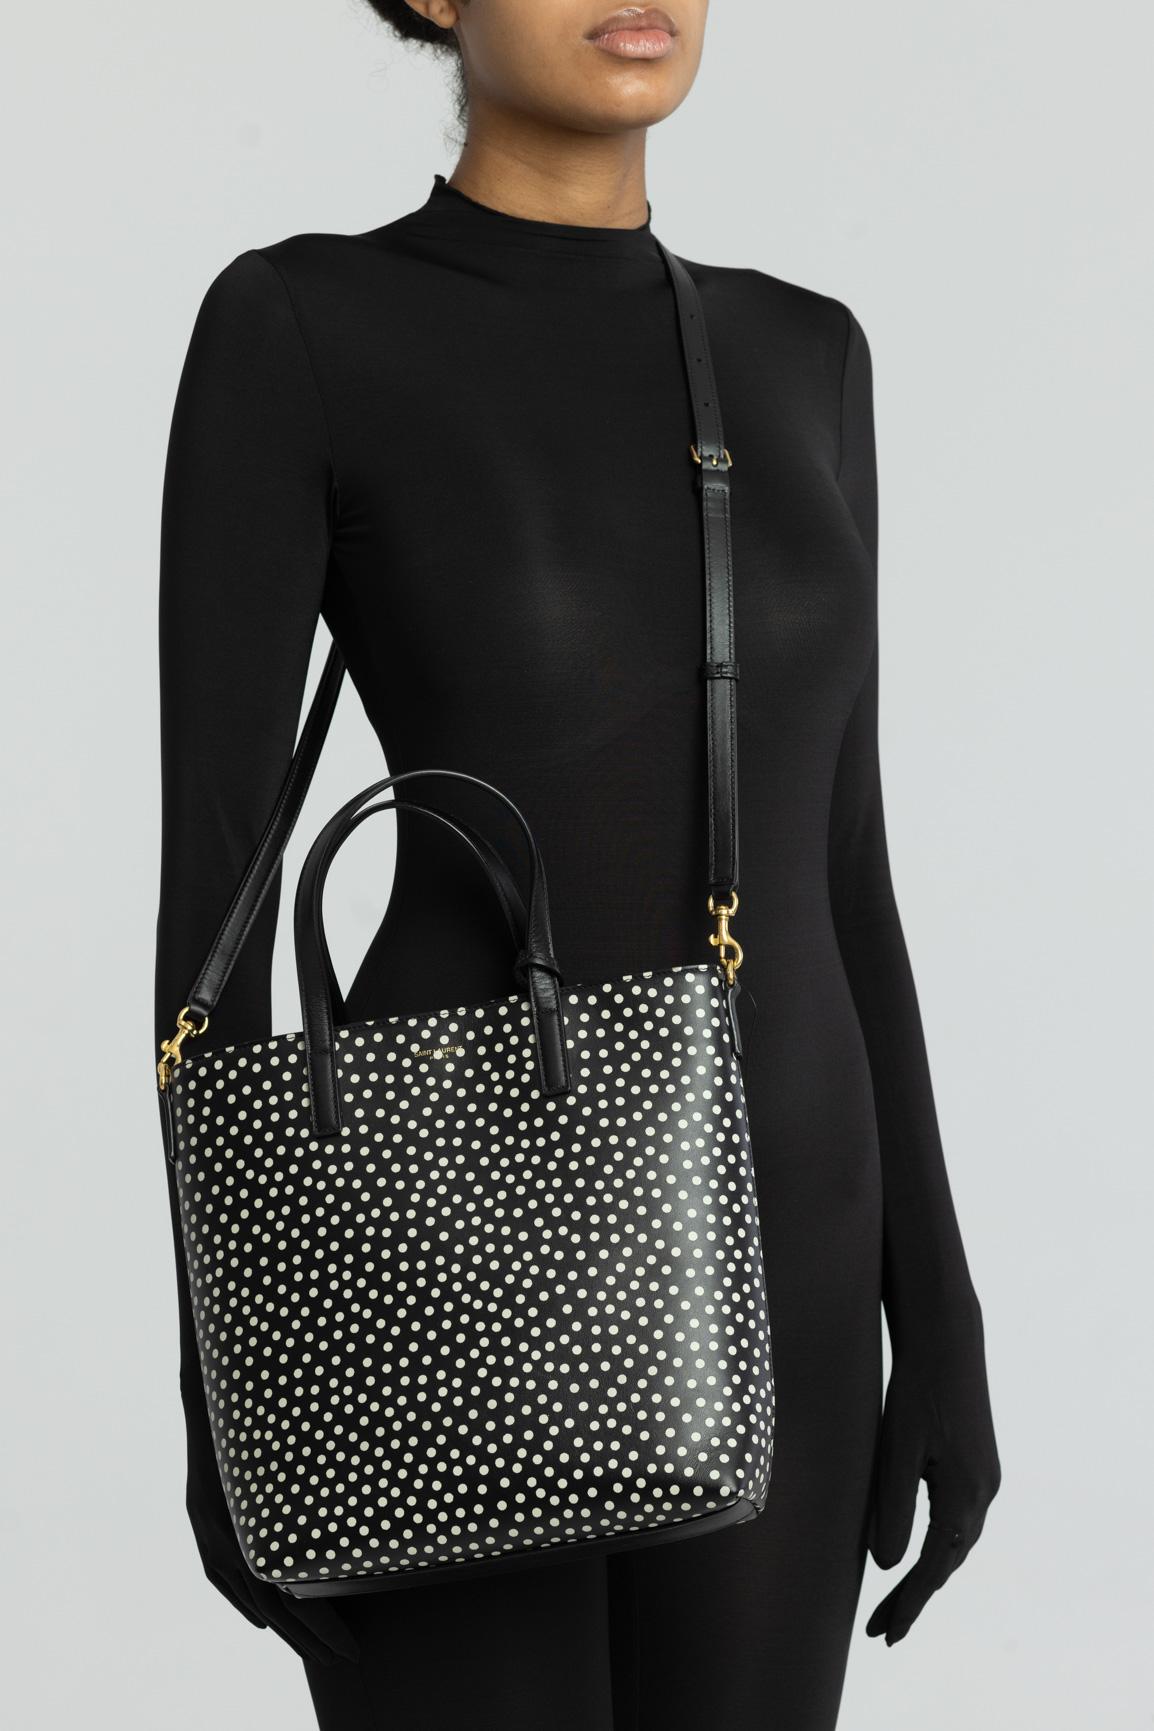 Saint Laurent Soft Leather Black Polka Dot Toy Shopping Bag In Excellent Condition For Sale In Montreal, Quebec